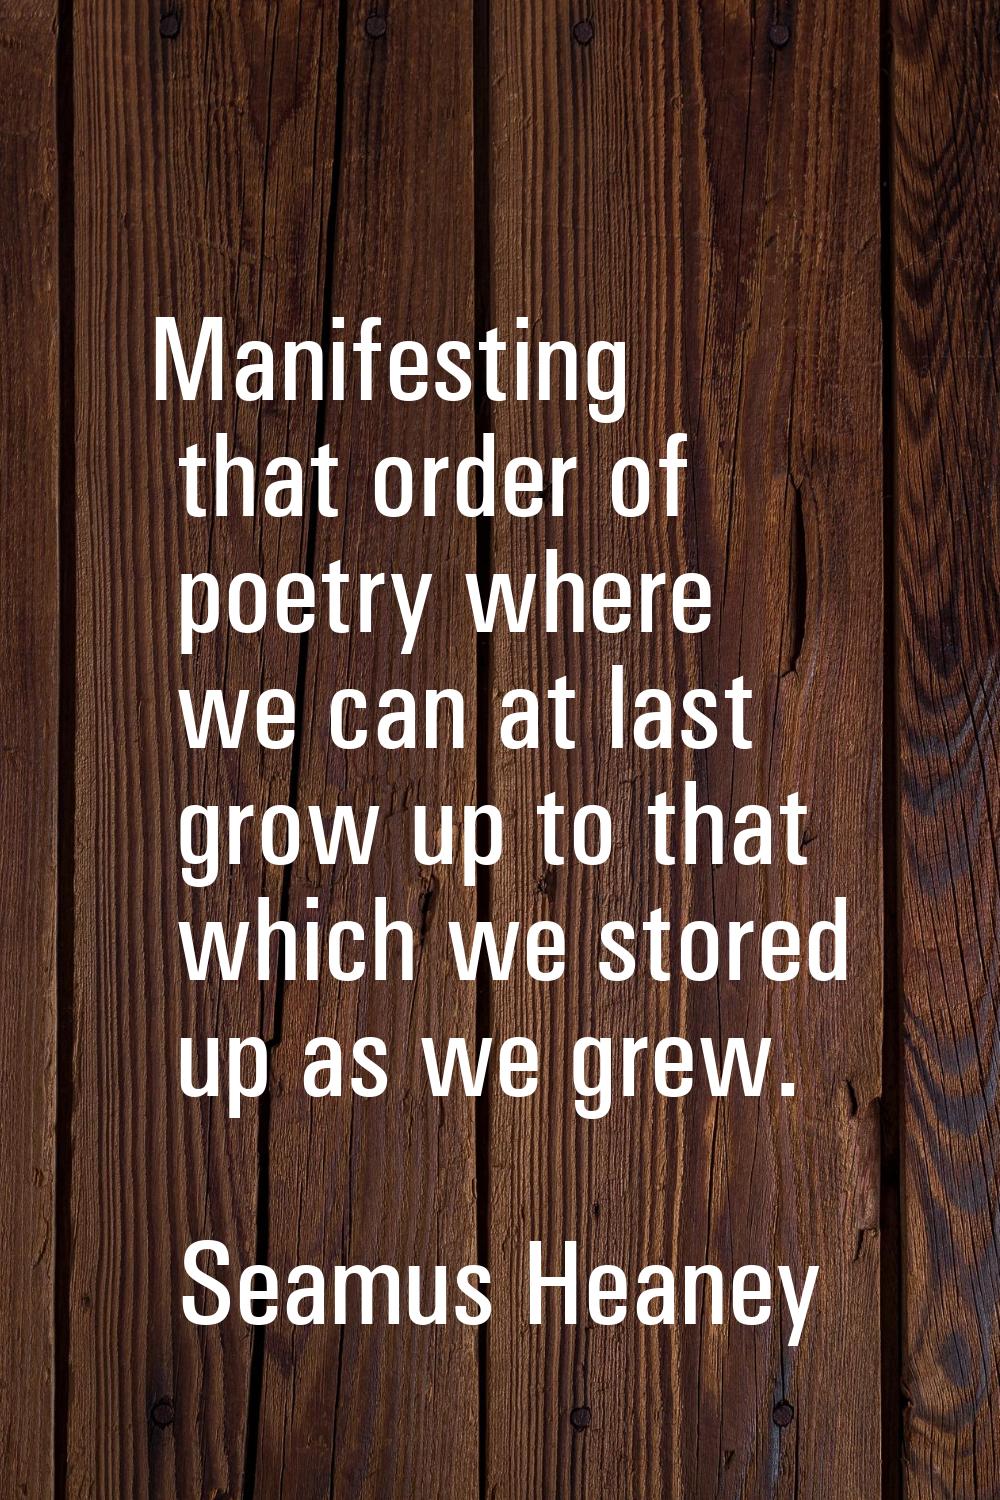 Manifesting that order of poetry where we can at last grow up to that which we stored up as we grew